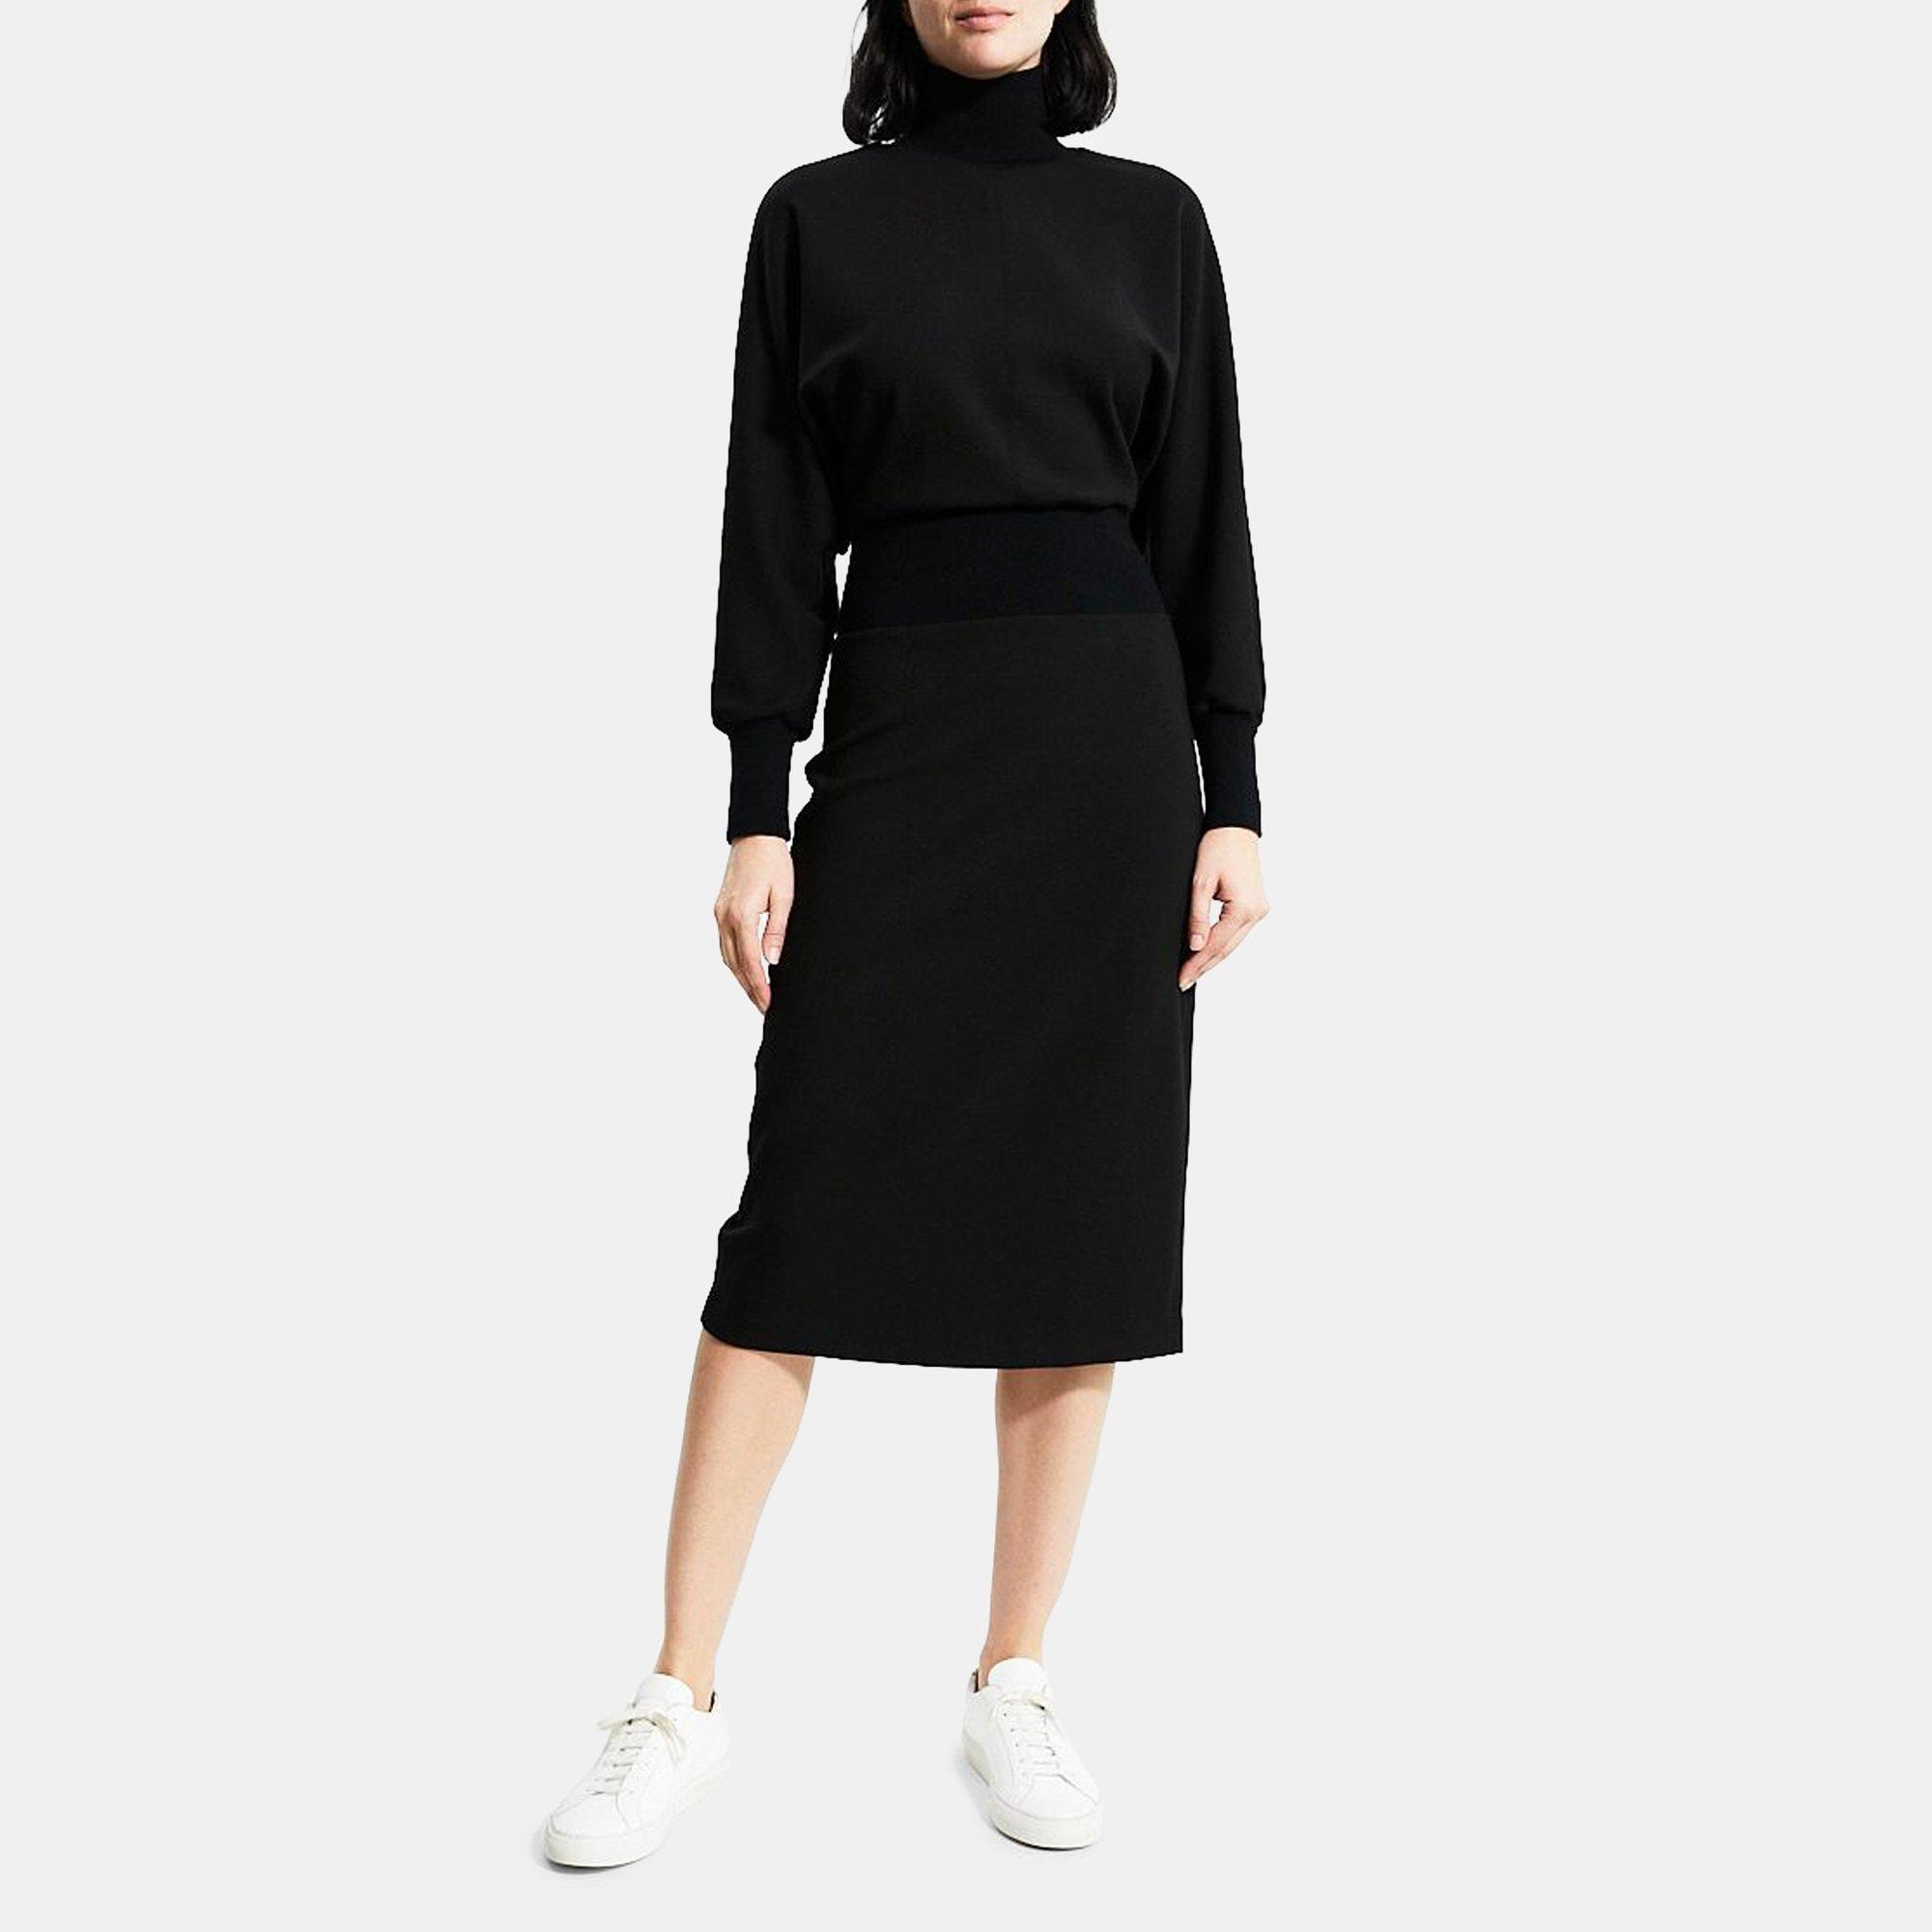 Theory Turtleneck Dress in Double-Knit Jersey